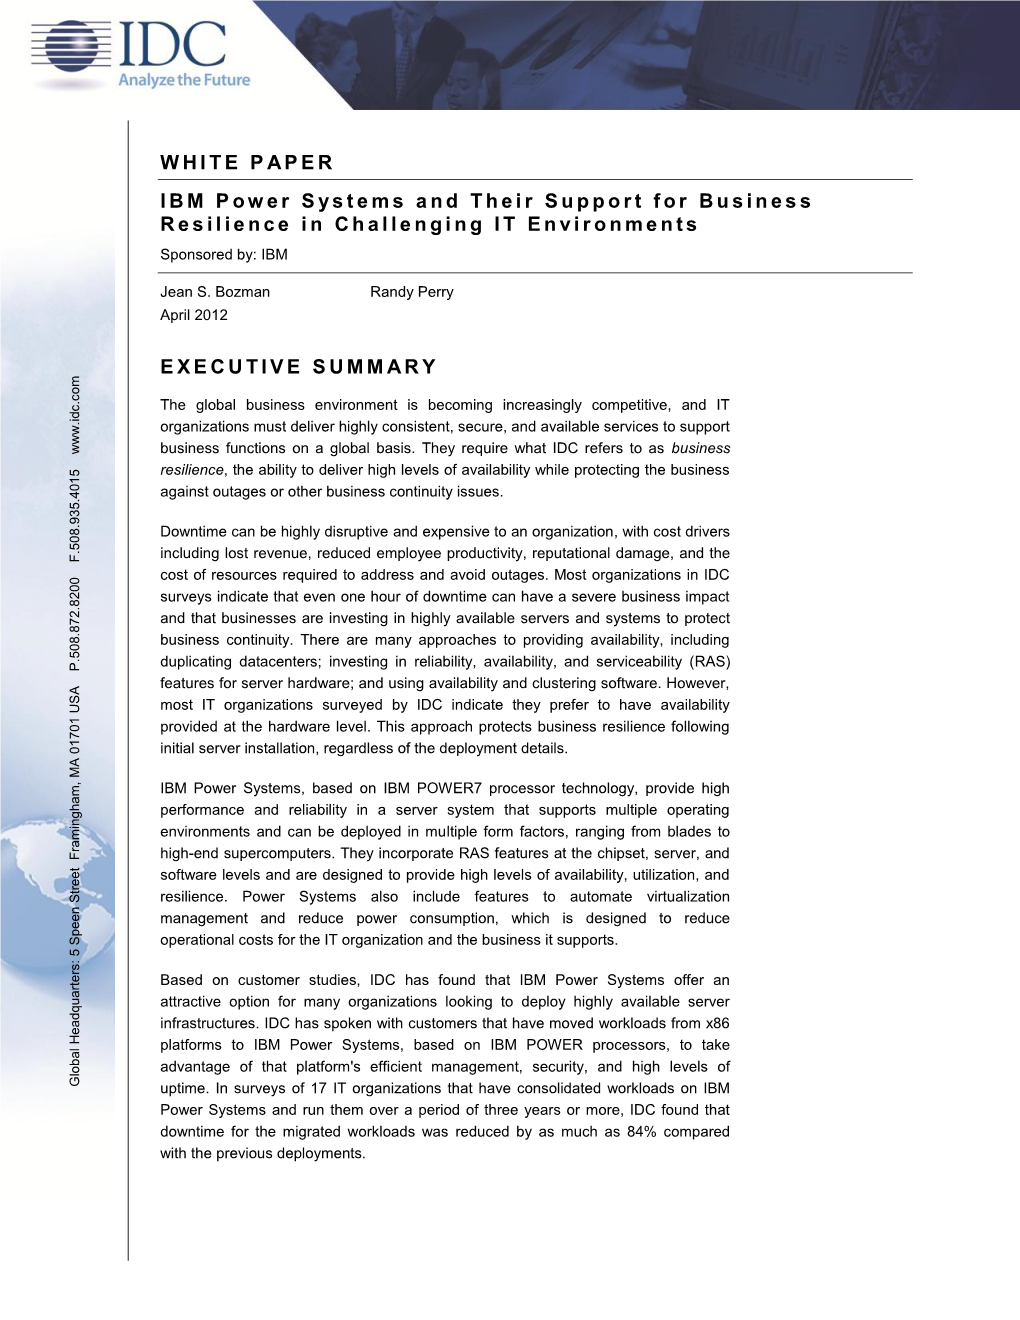 WHITE PAPER IBM Power Systems and Their Support for Business